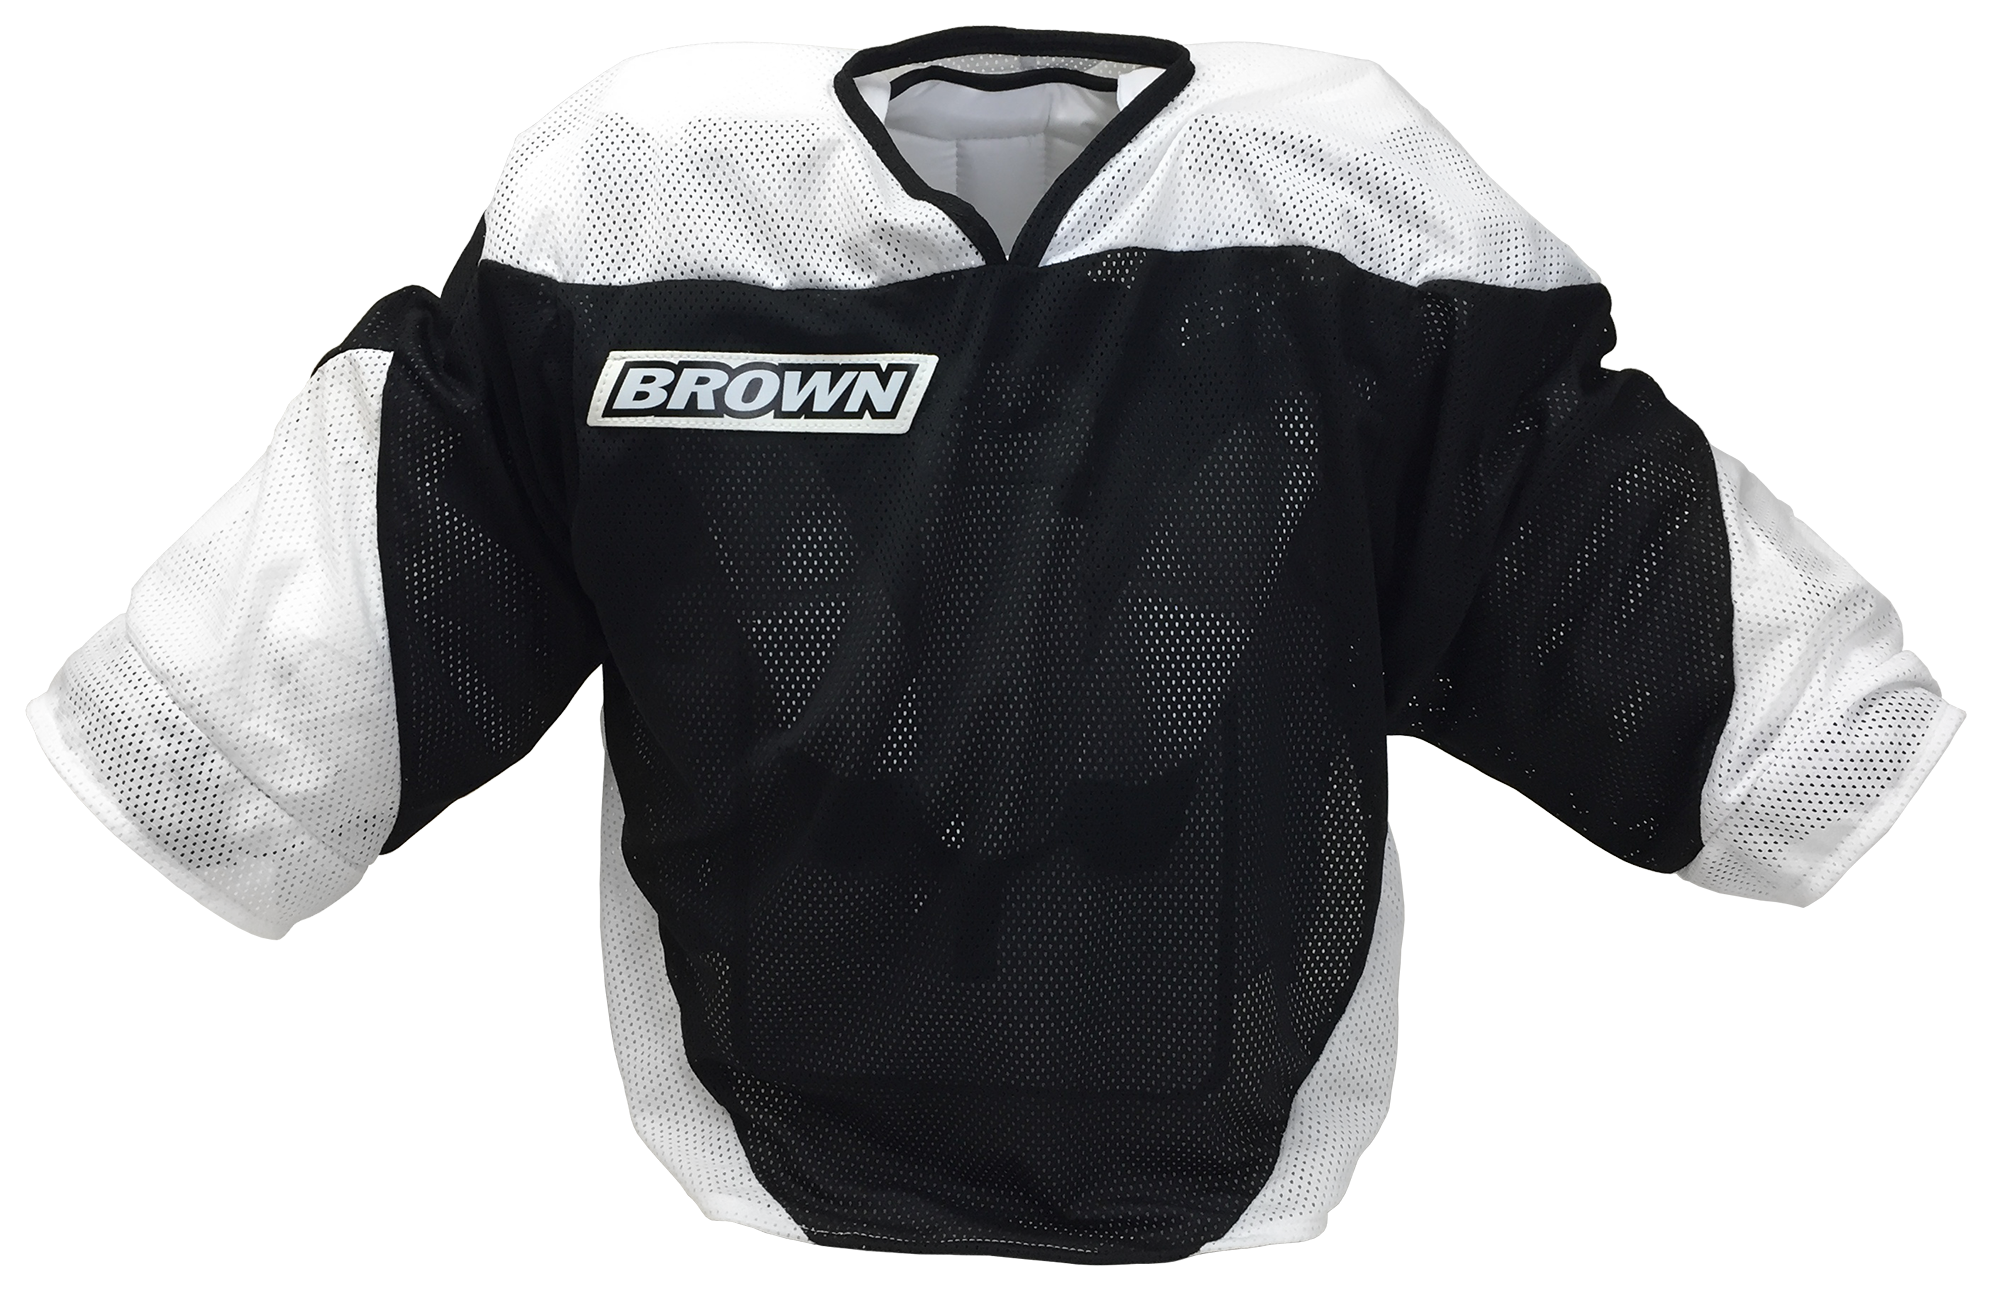 Black and white jersey